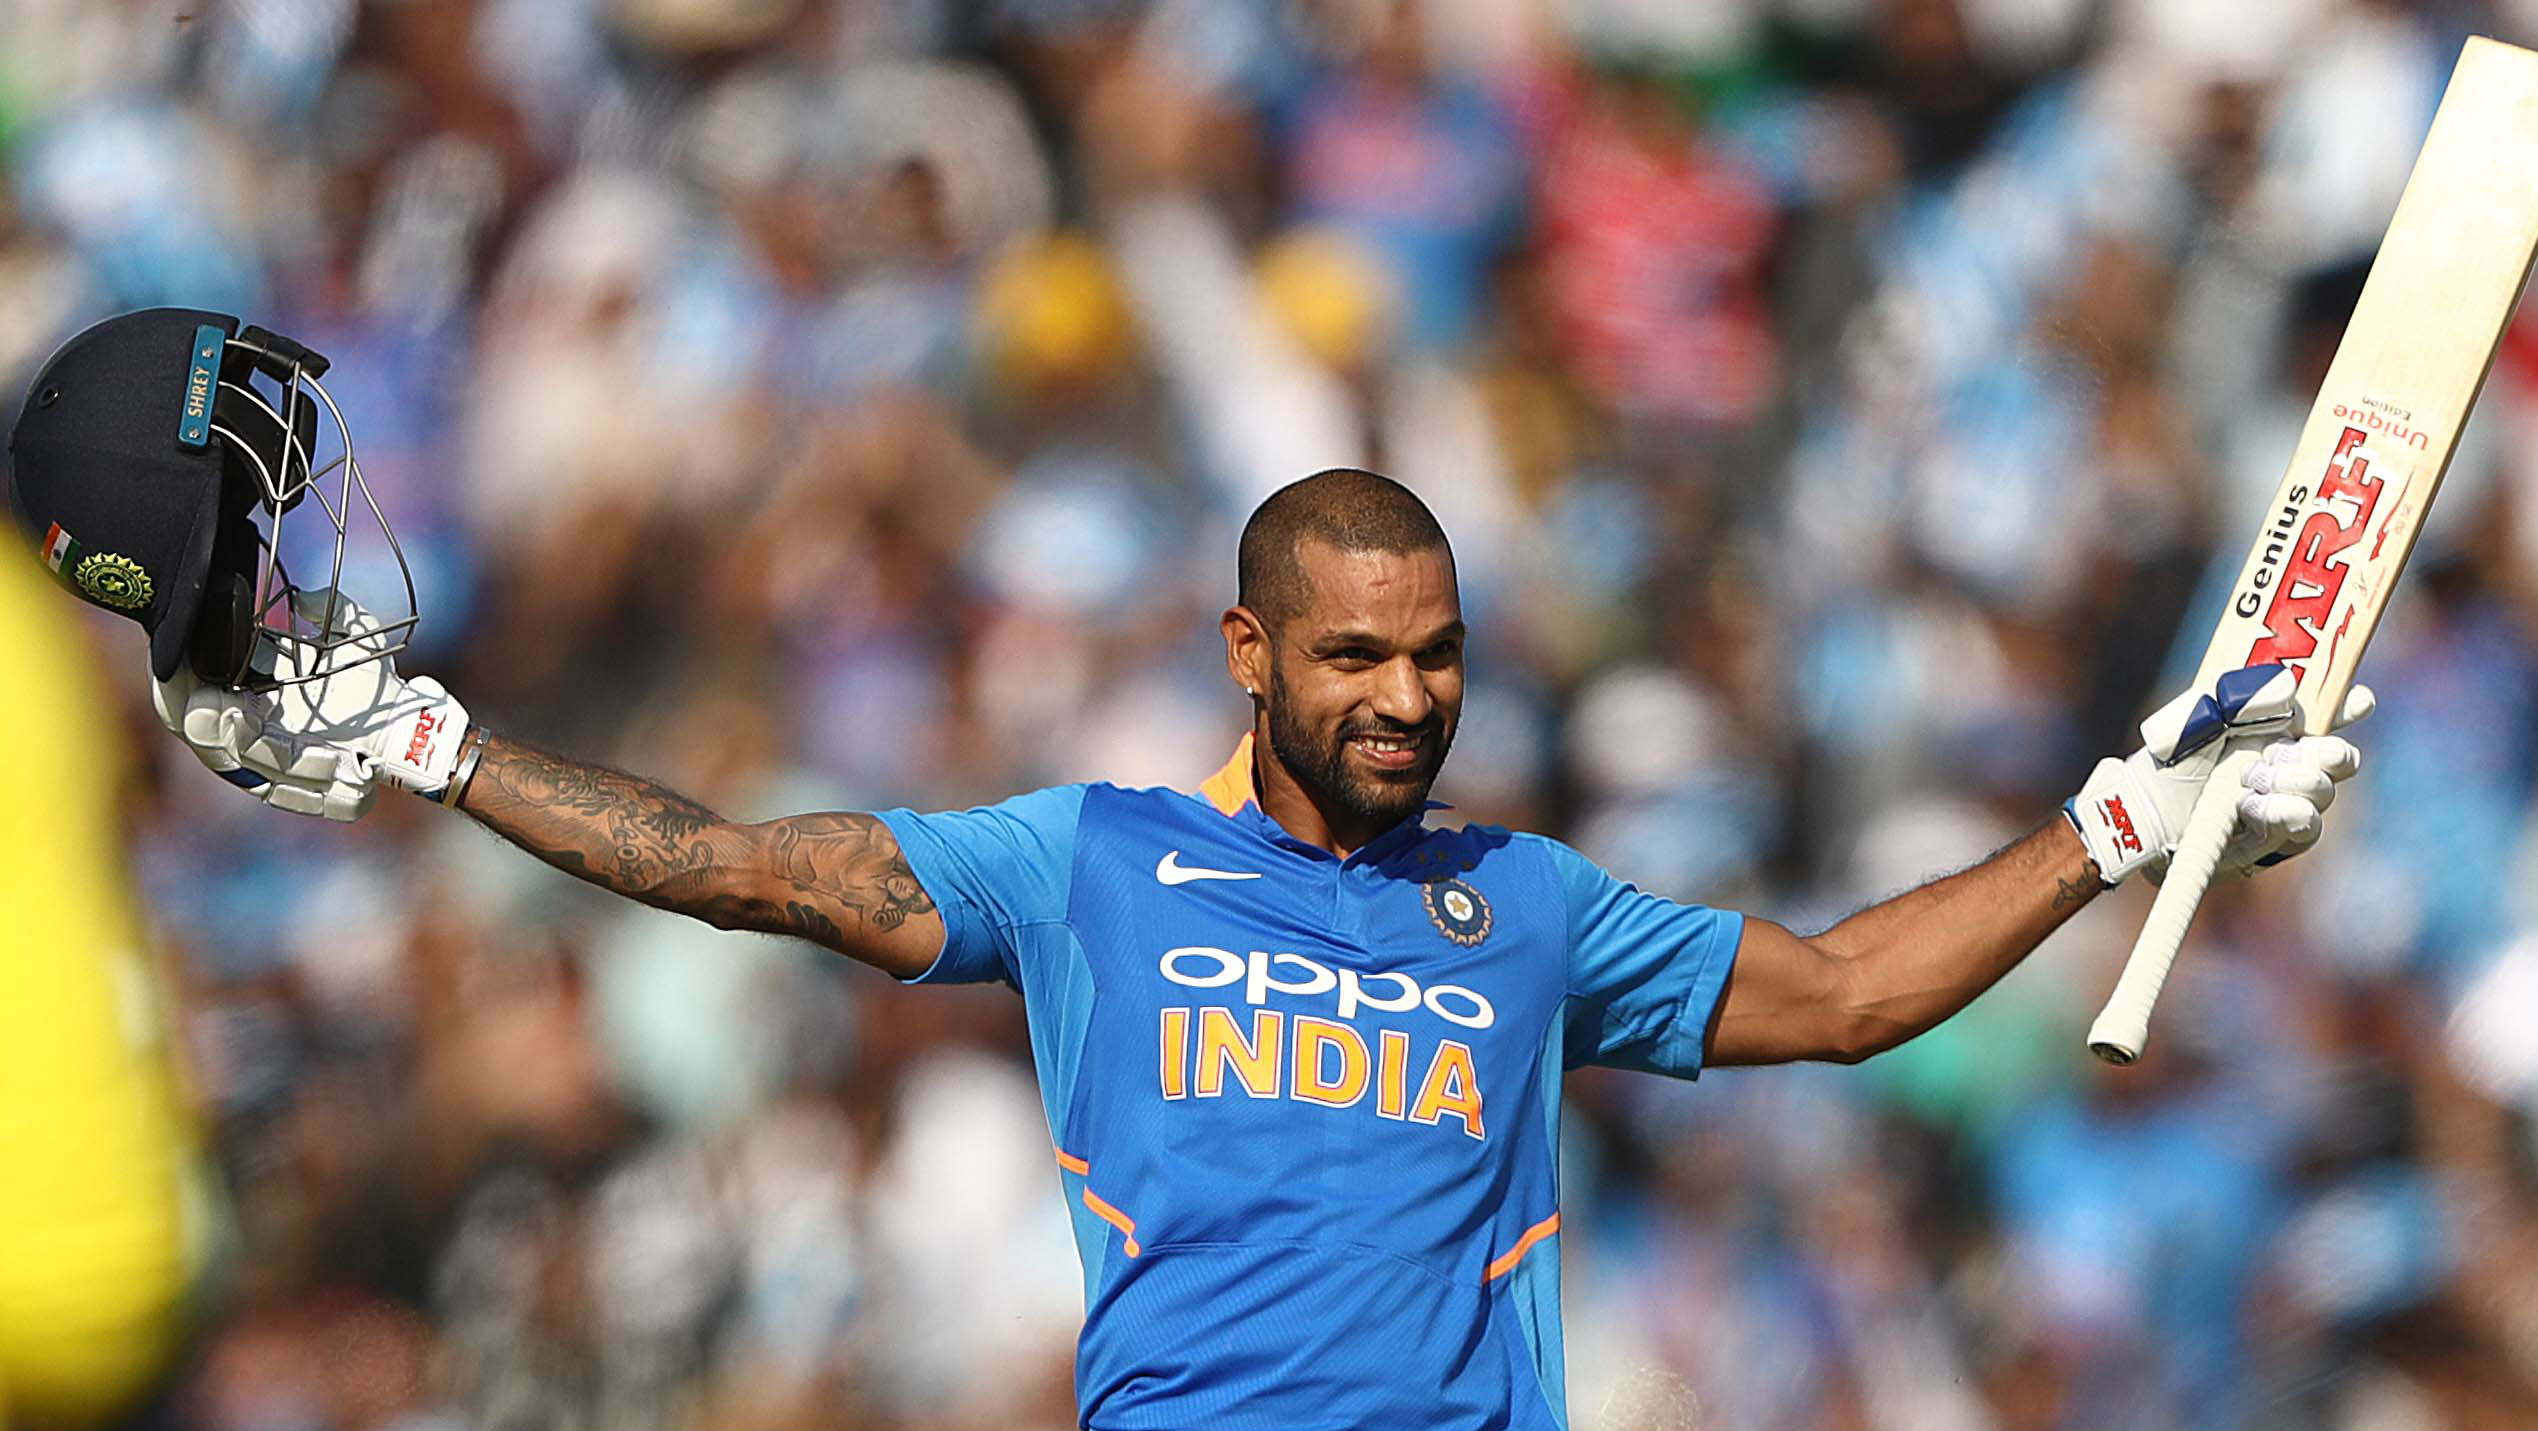 Shikhar Dhawan's two points made AB de Villiers happy